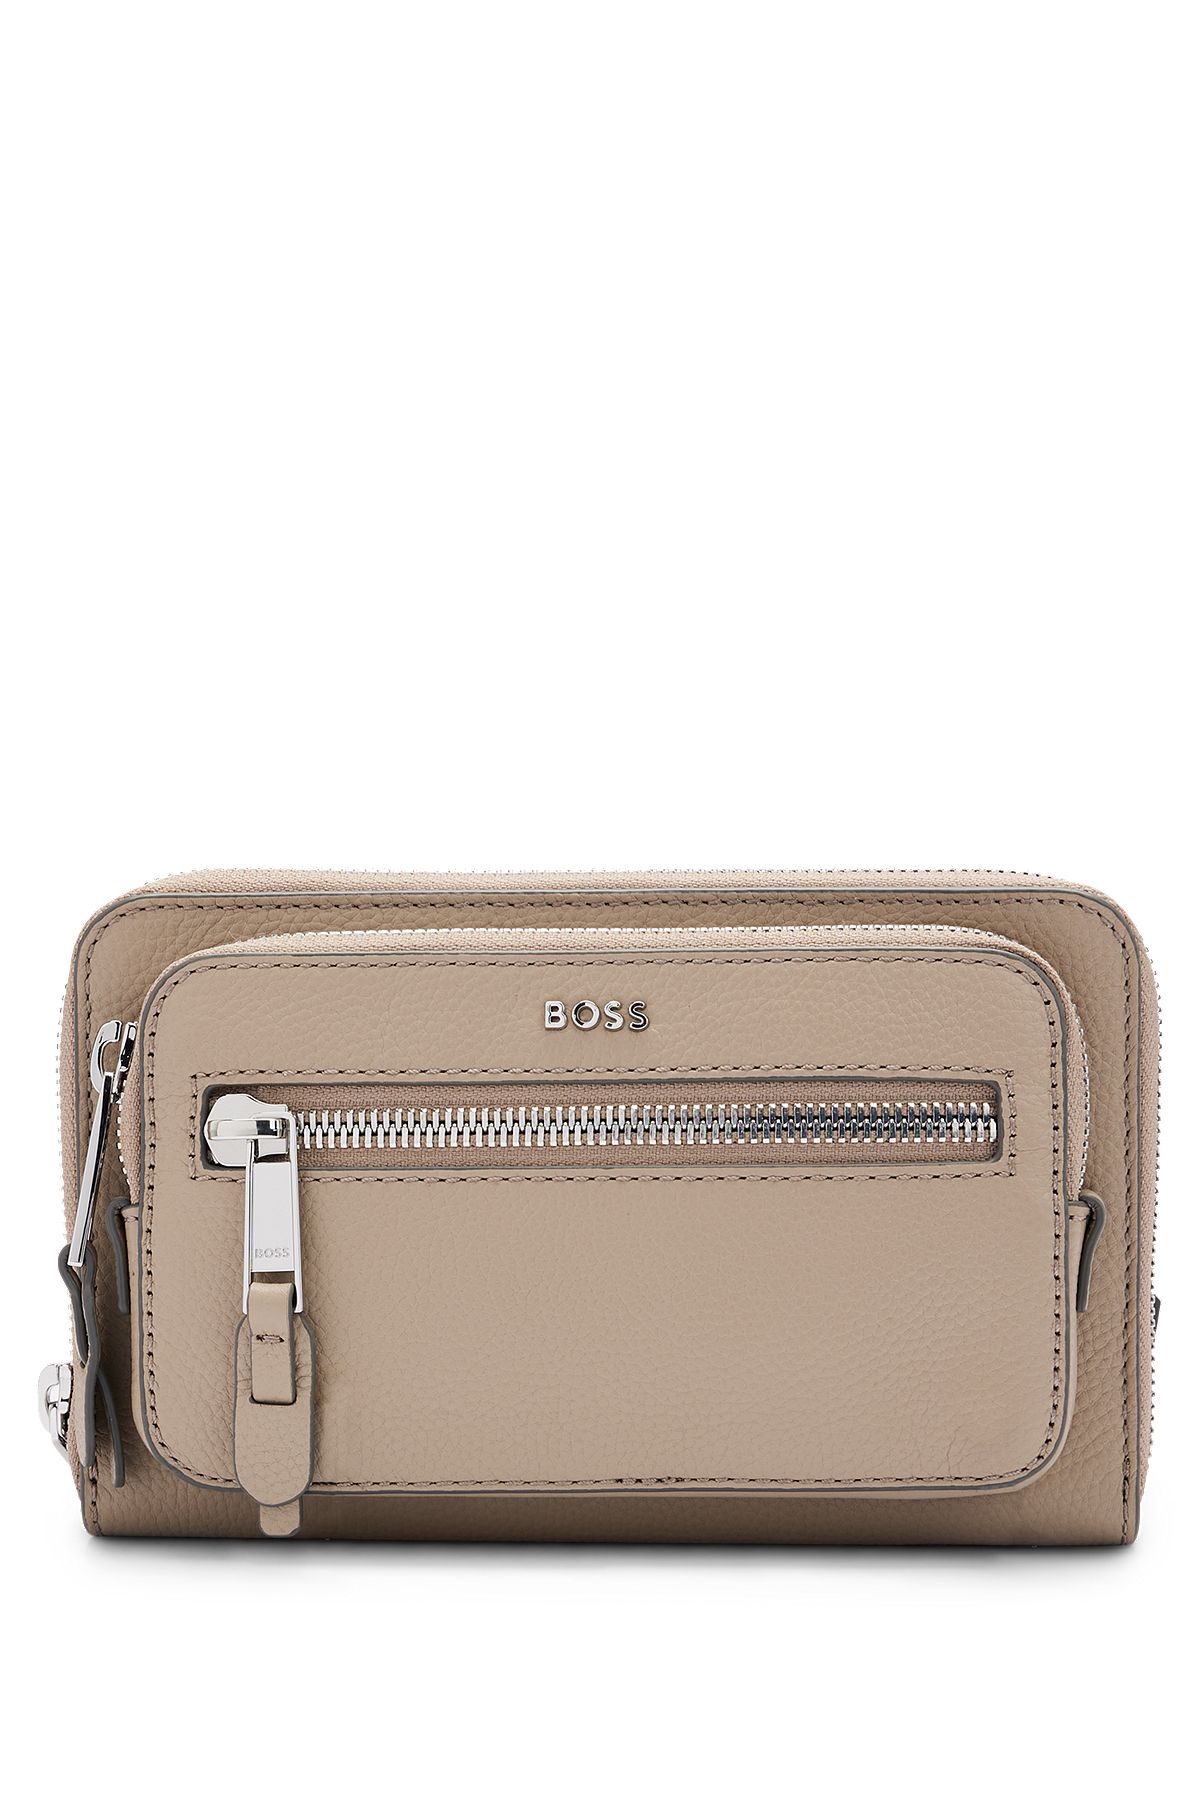 Crossbody bag in grained leather with logo lettering, Light Beige